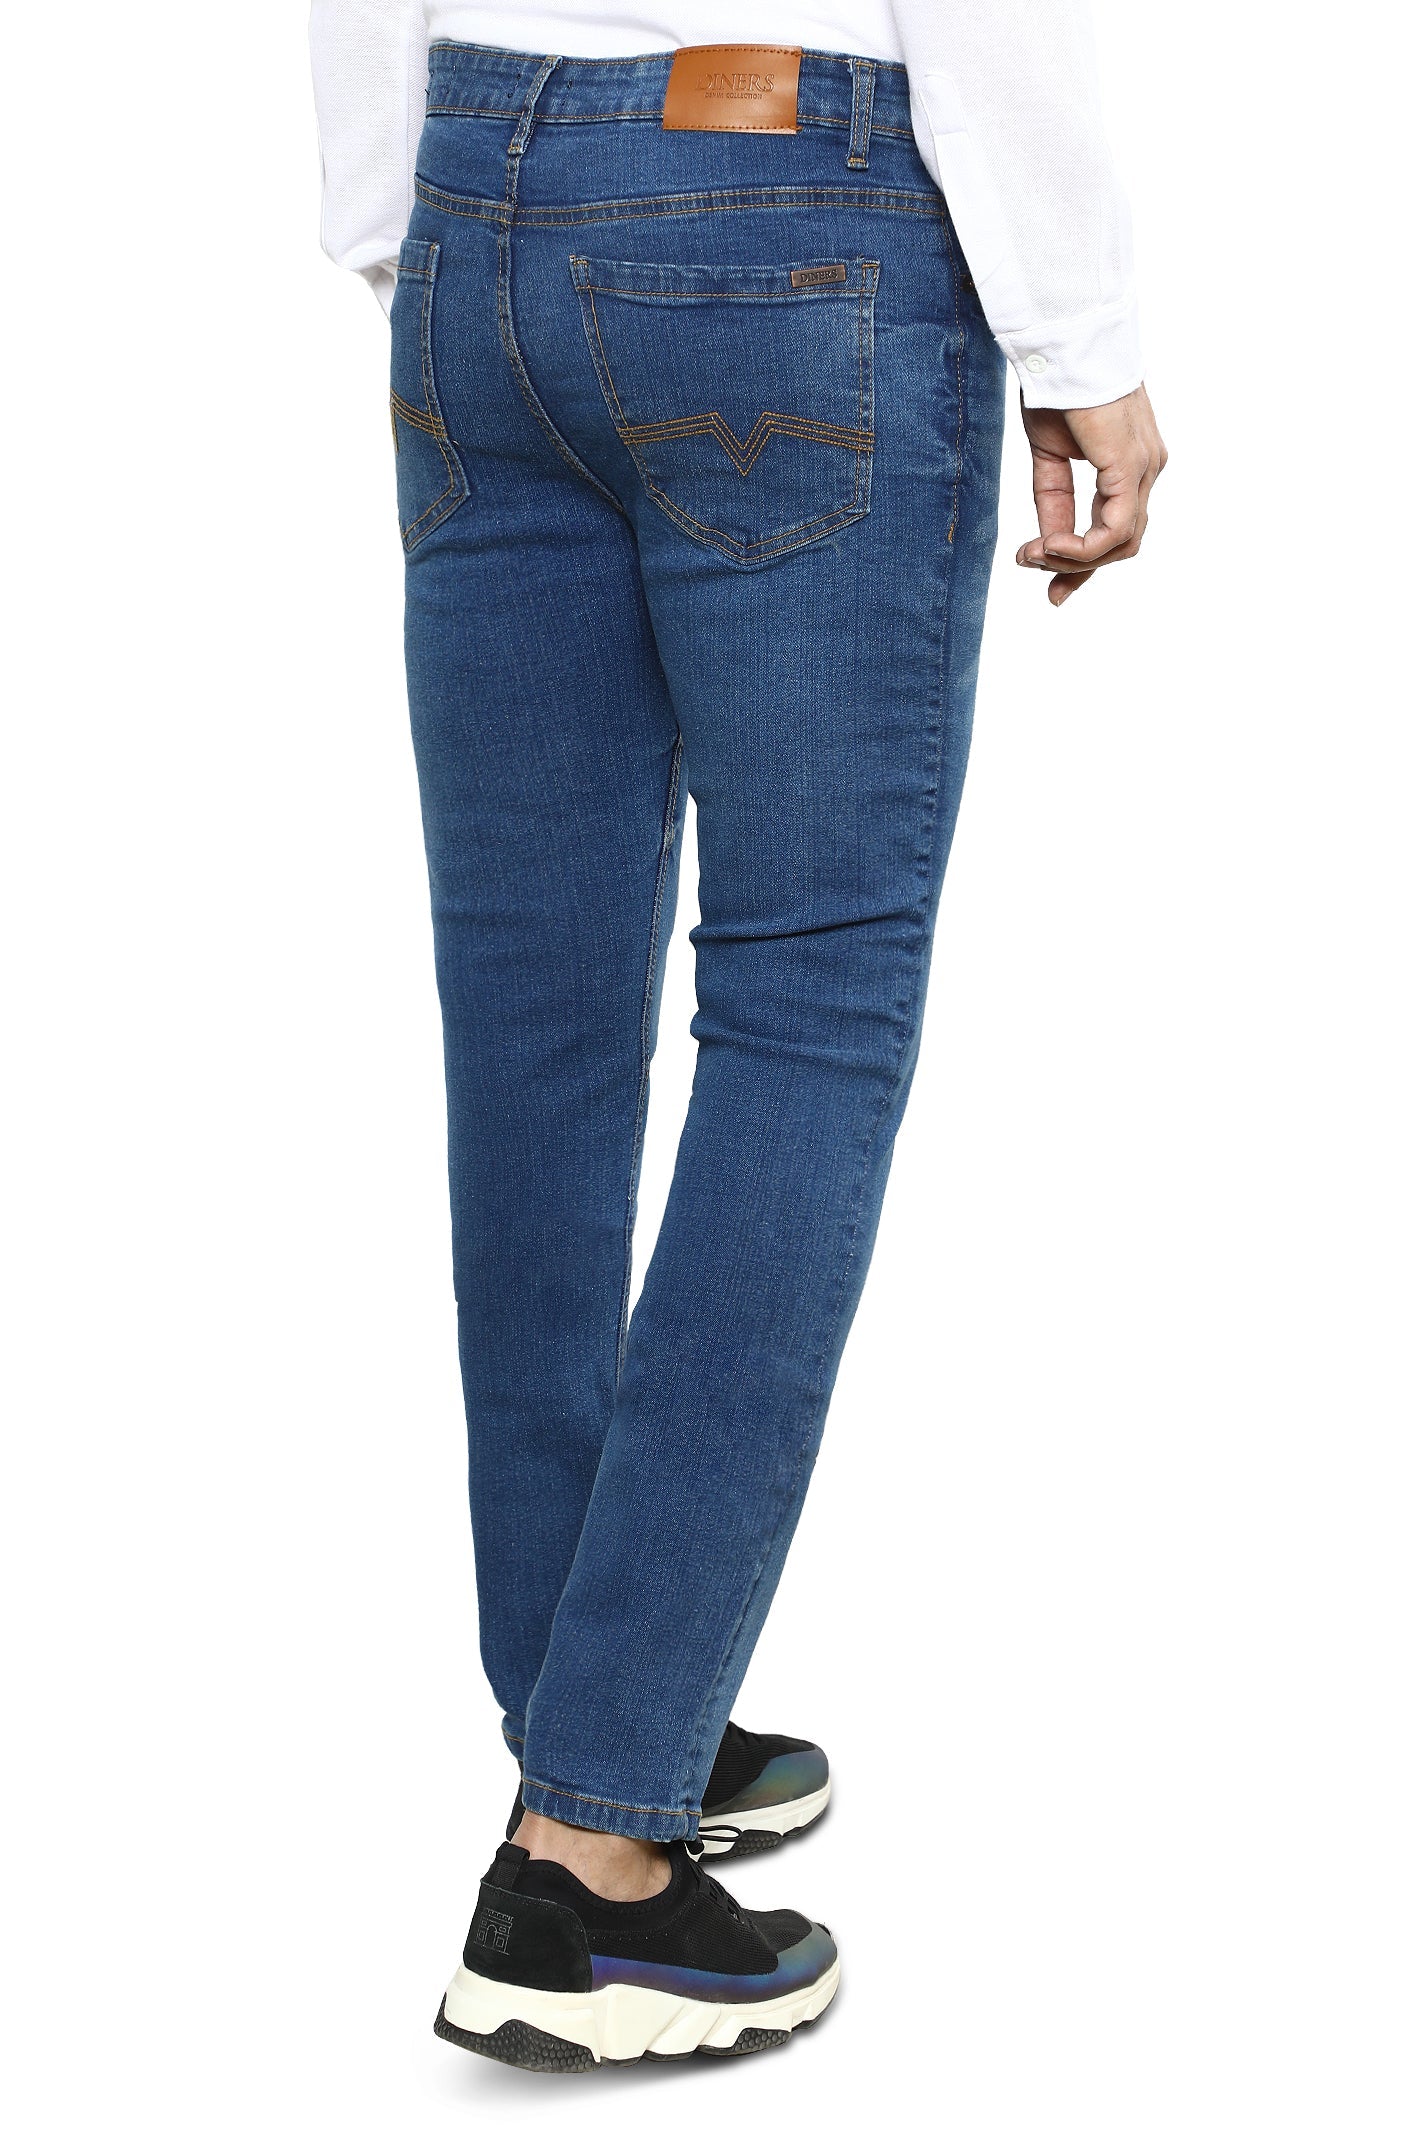 Casual Jeans SKU: BJ3102-D-BLUE - Diners